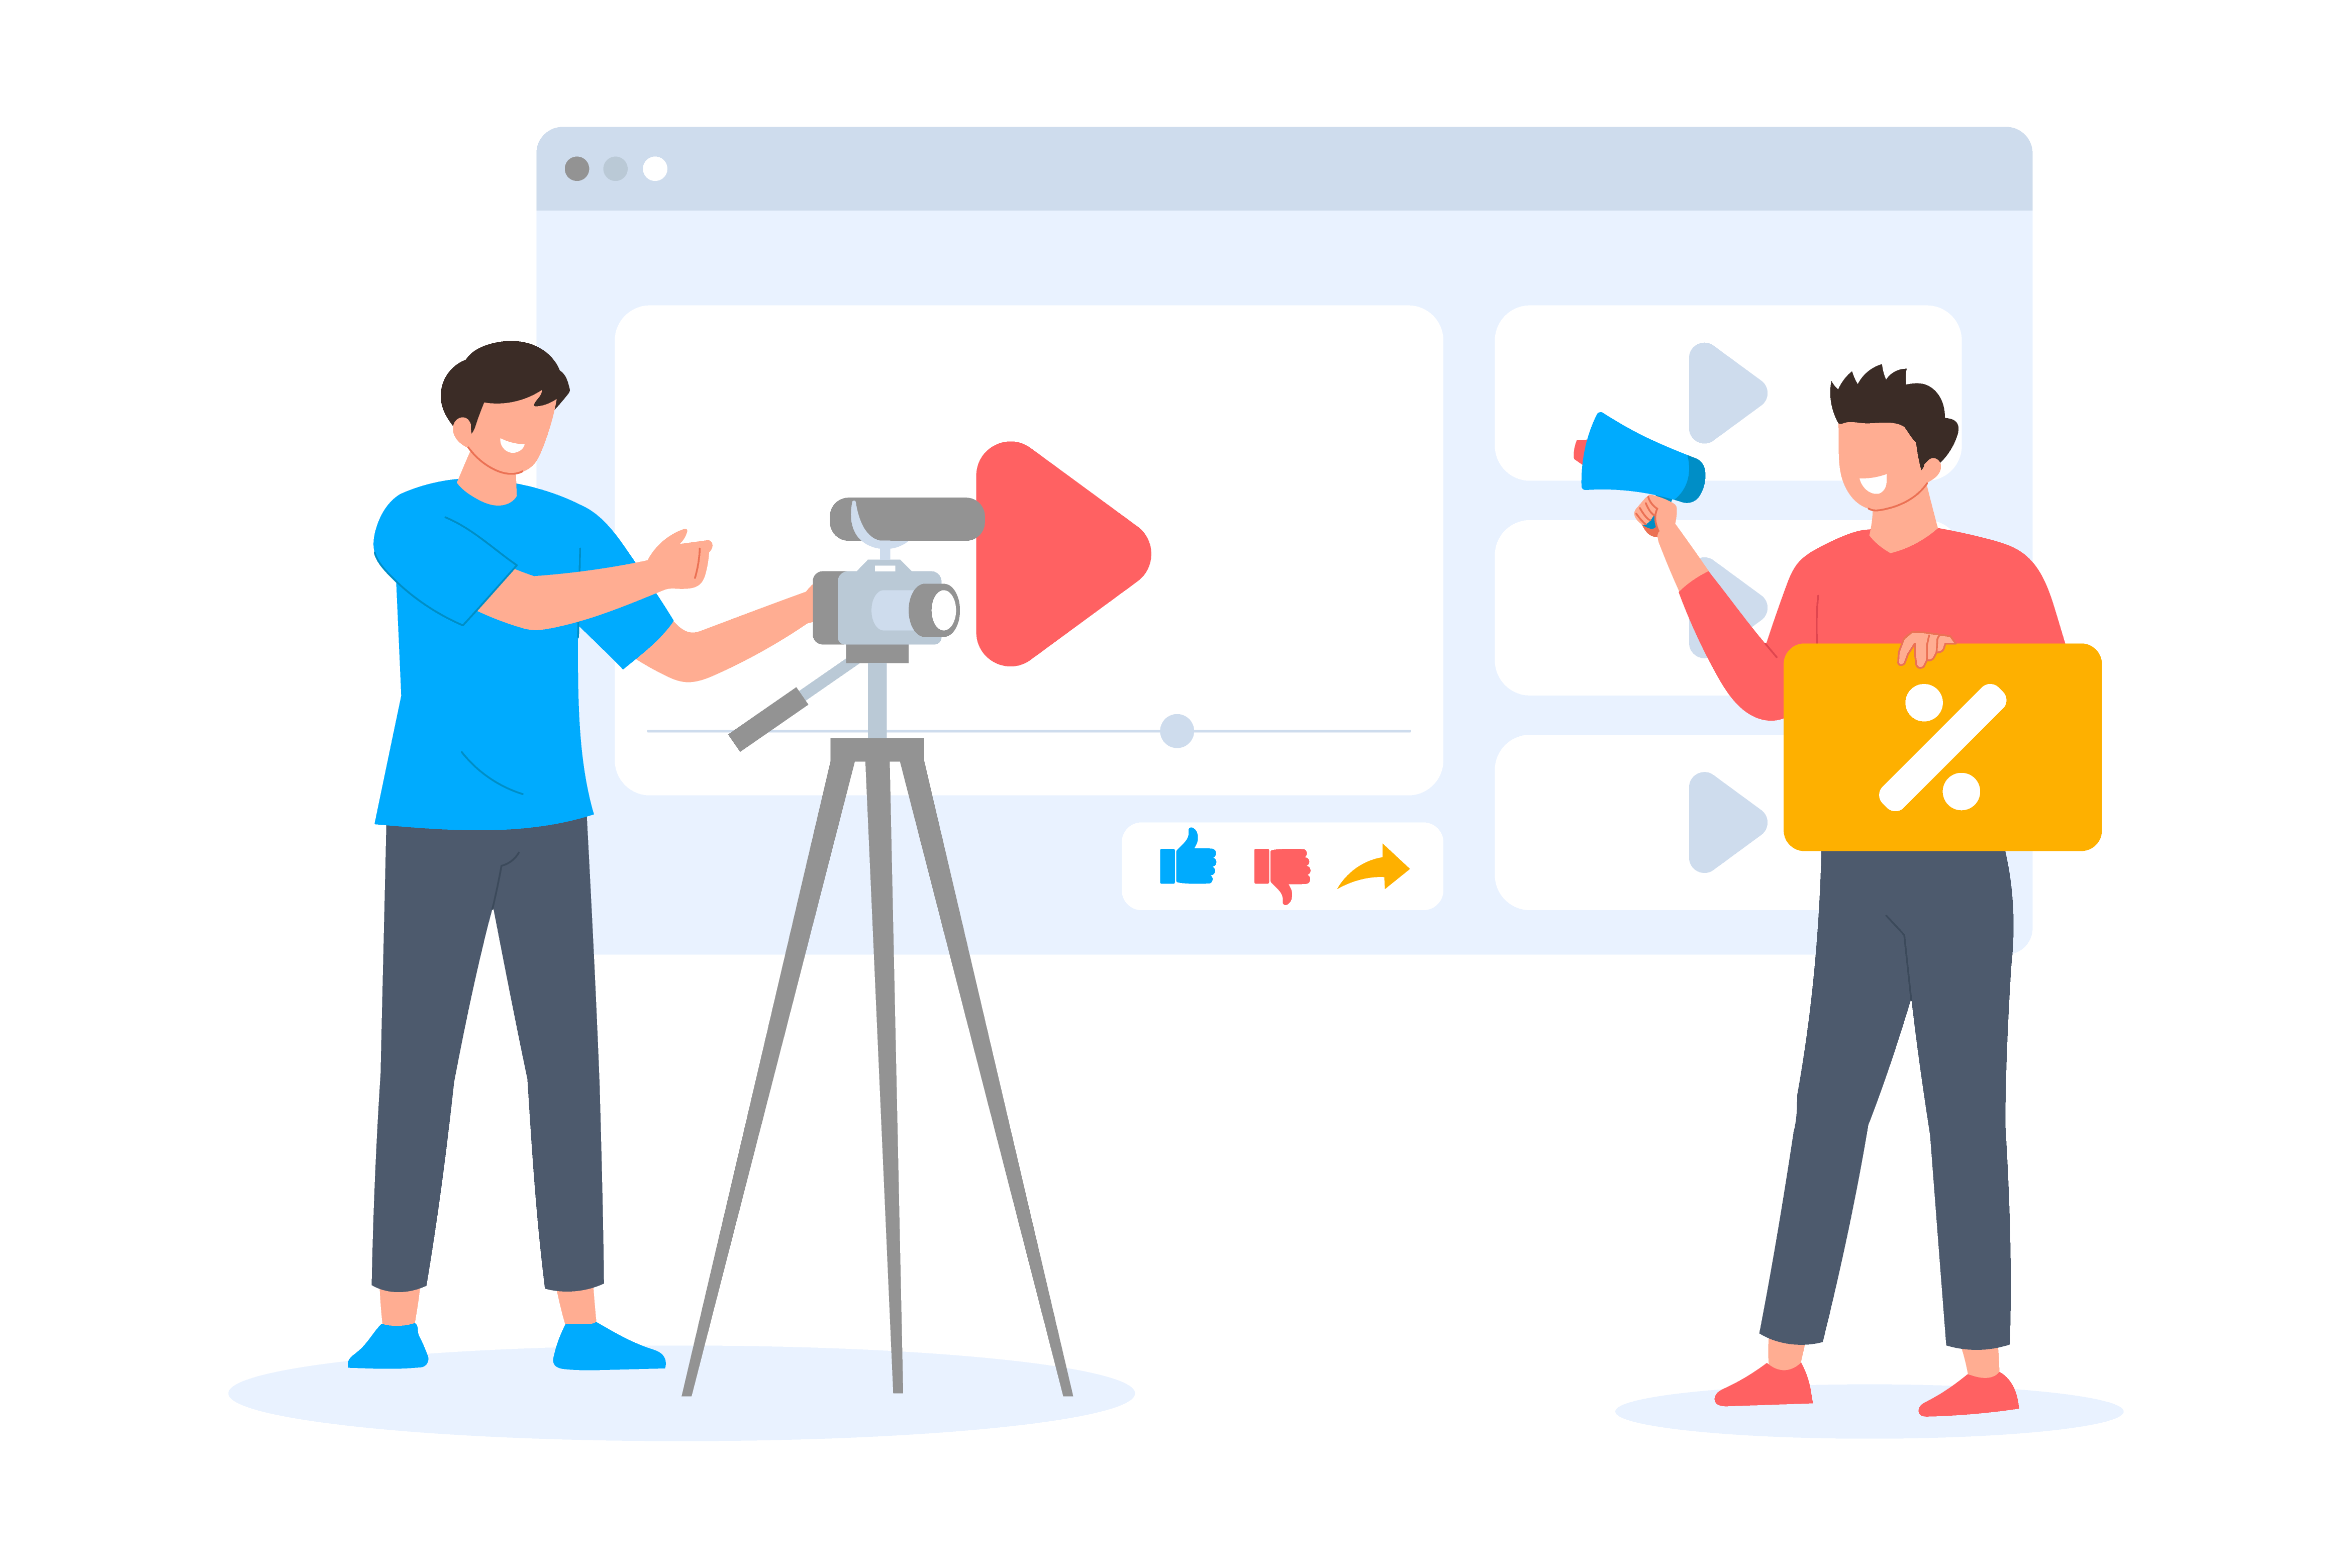 A B2B SaaS Businesses’ Guide to Great Product Feature Videos